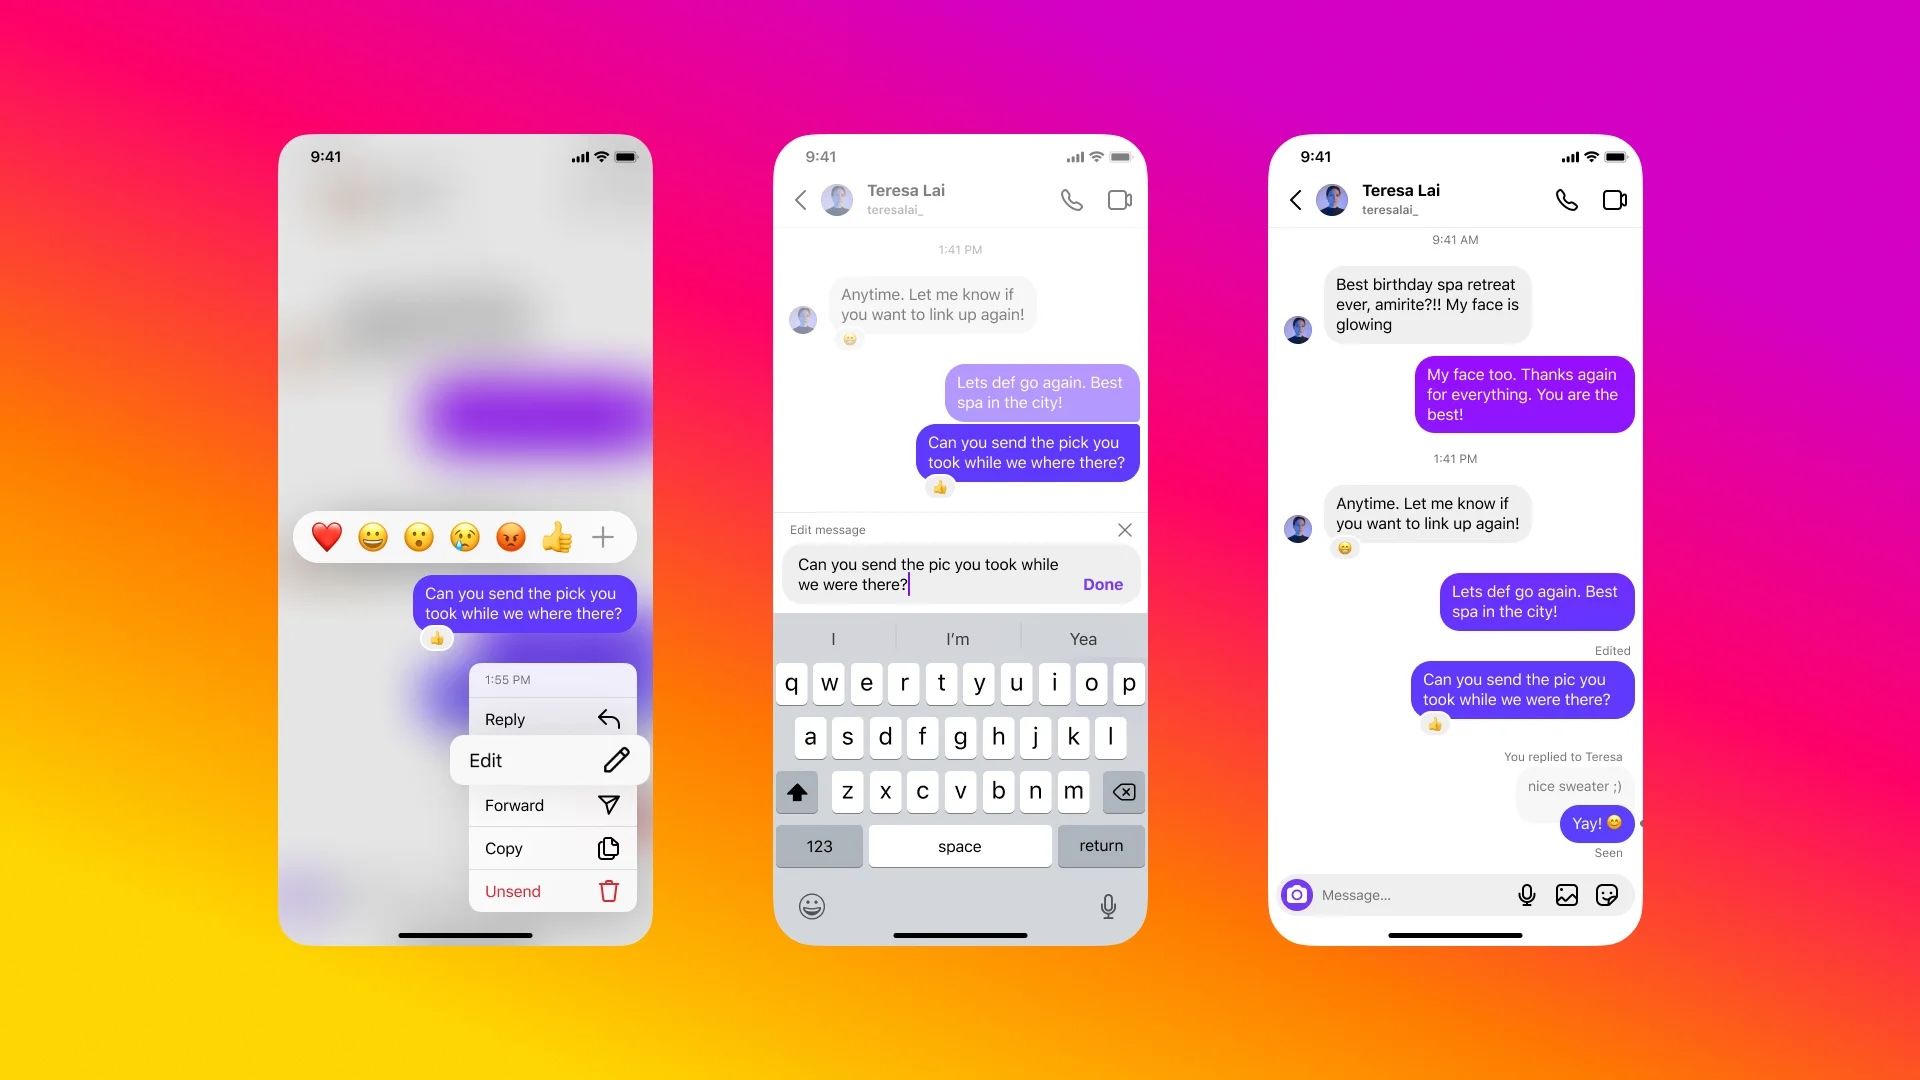 Instagram now lets users edit messages in DM.